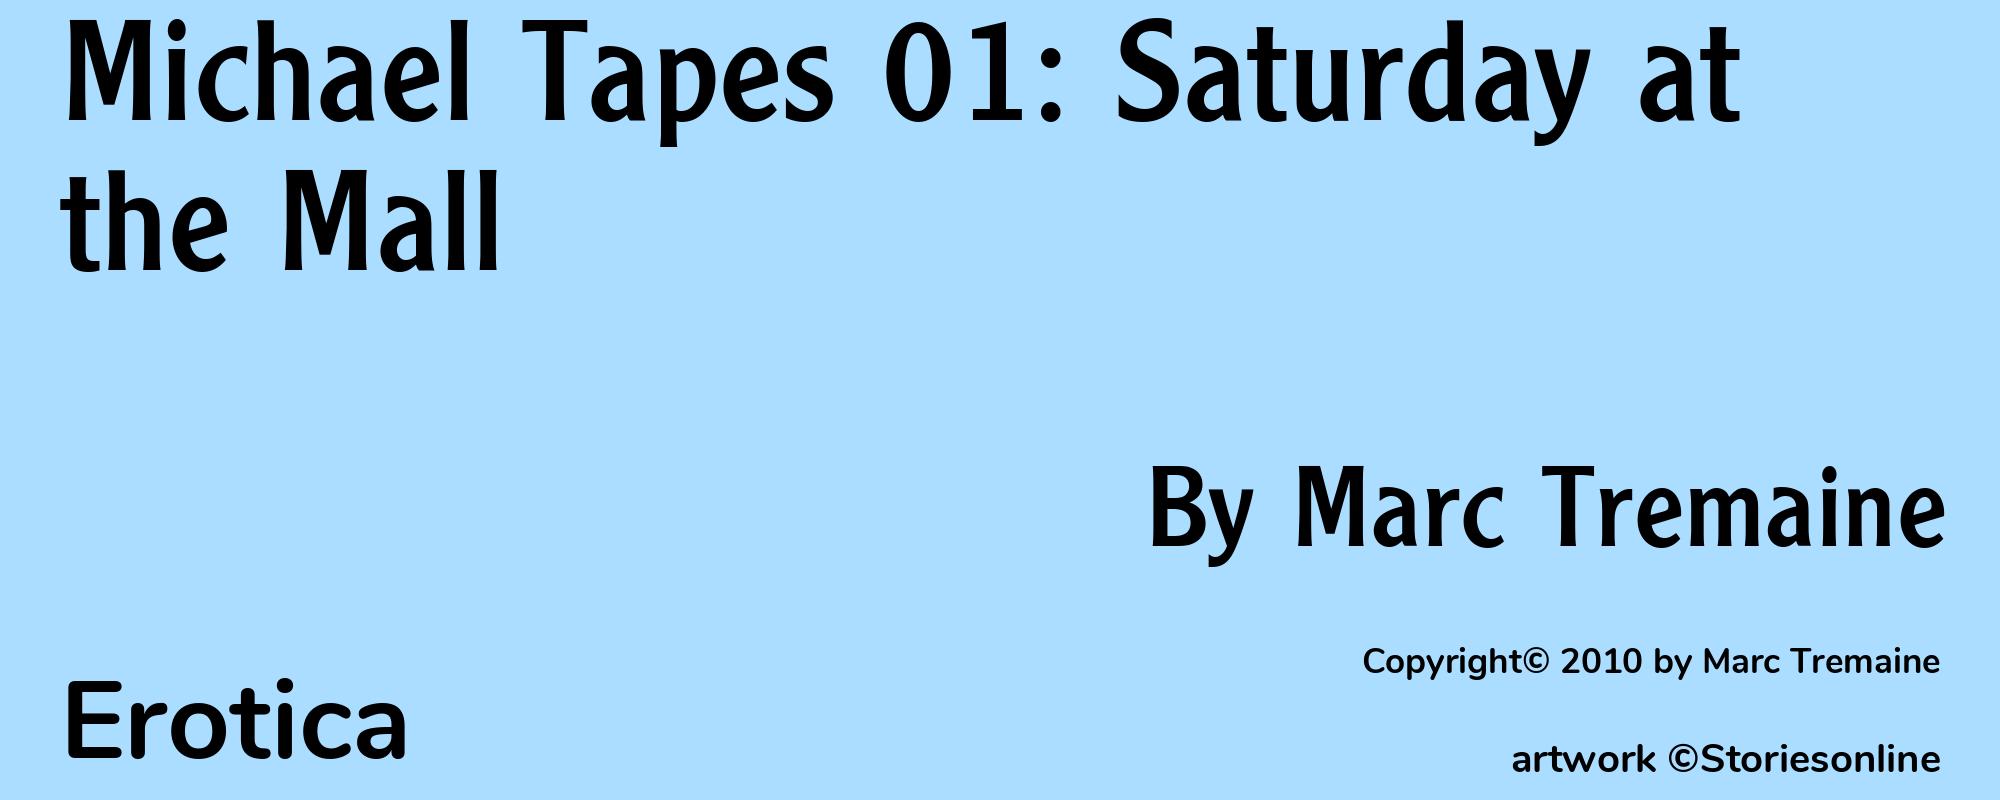 Michael Tapes 01: Saturday at the Mall - Cover